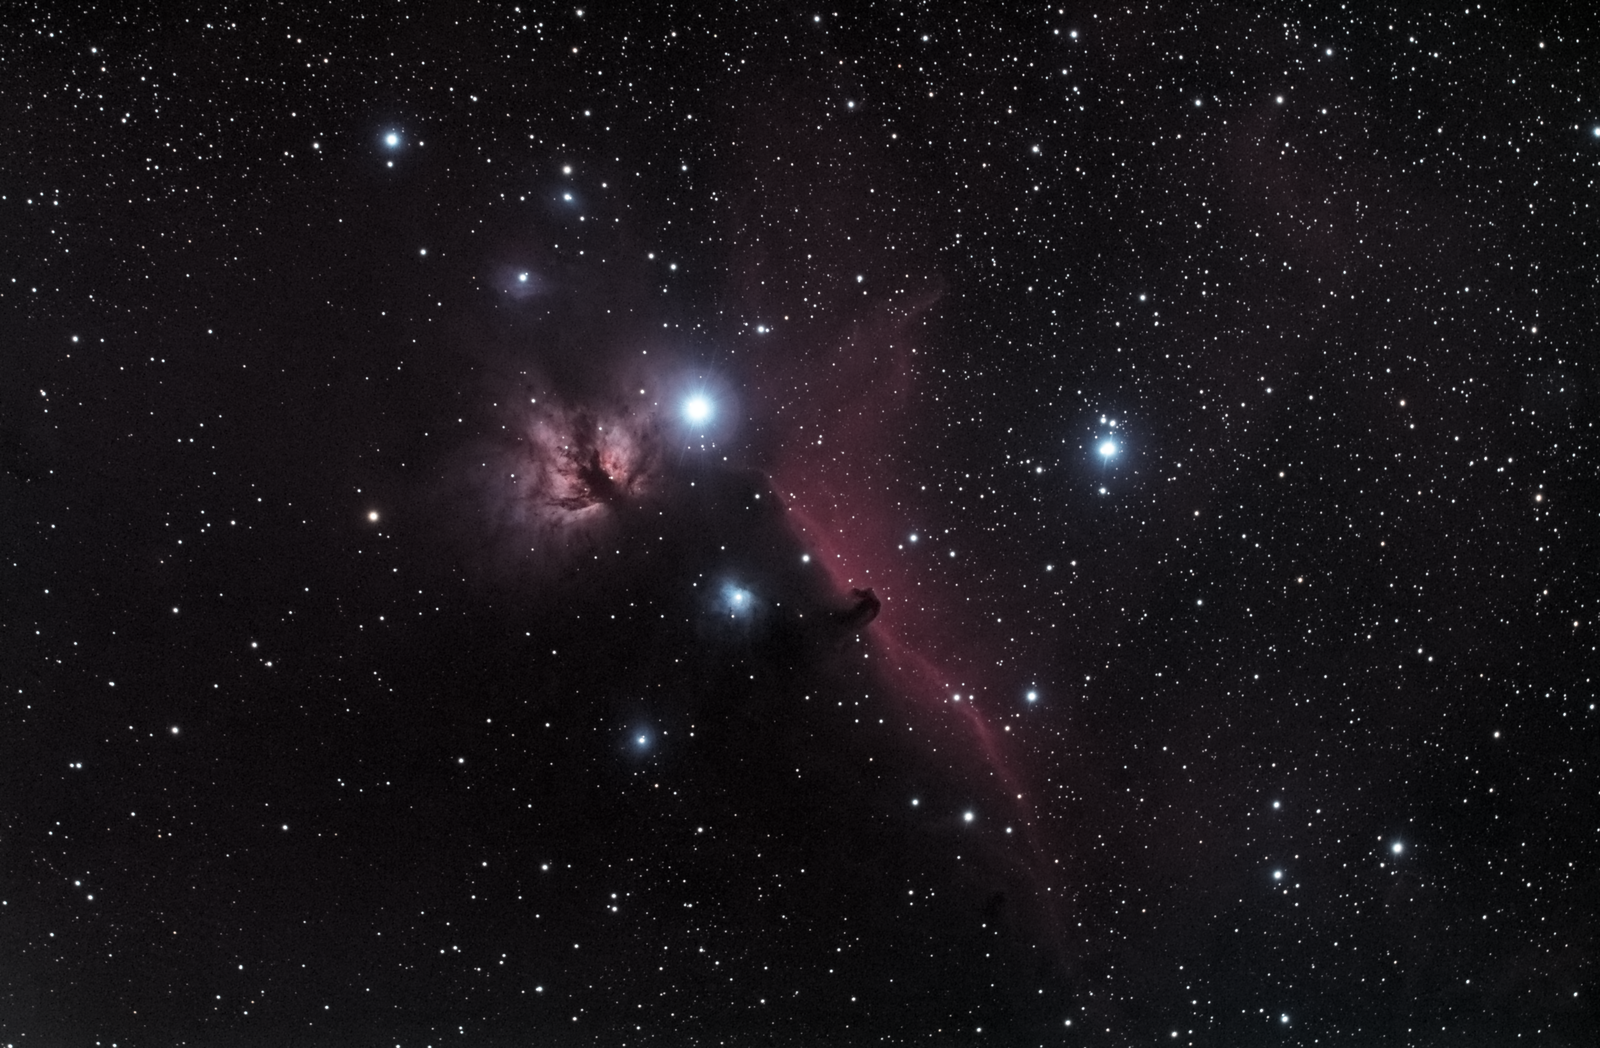 Flame and Horsehead 12/27 Reprocessed